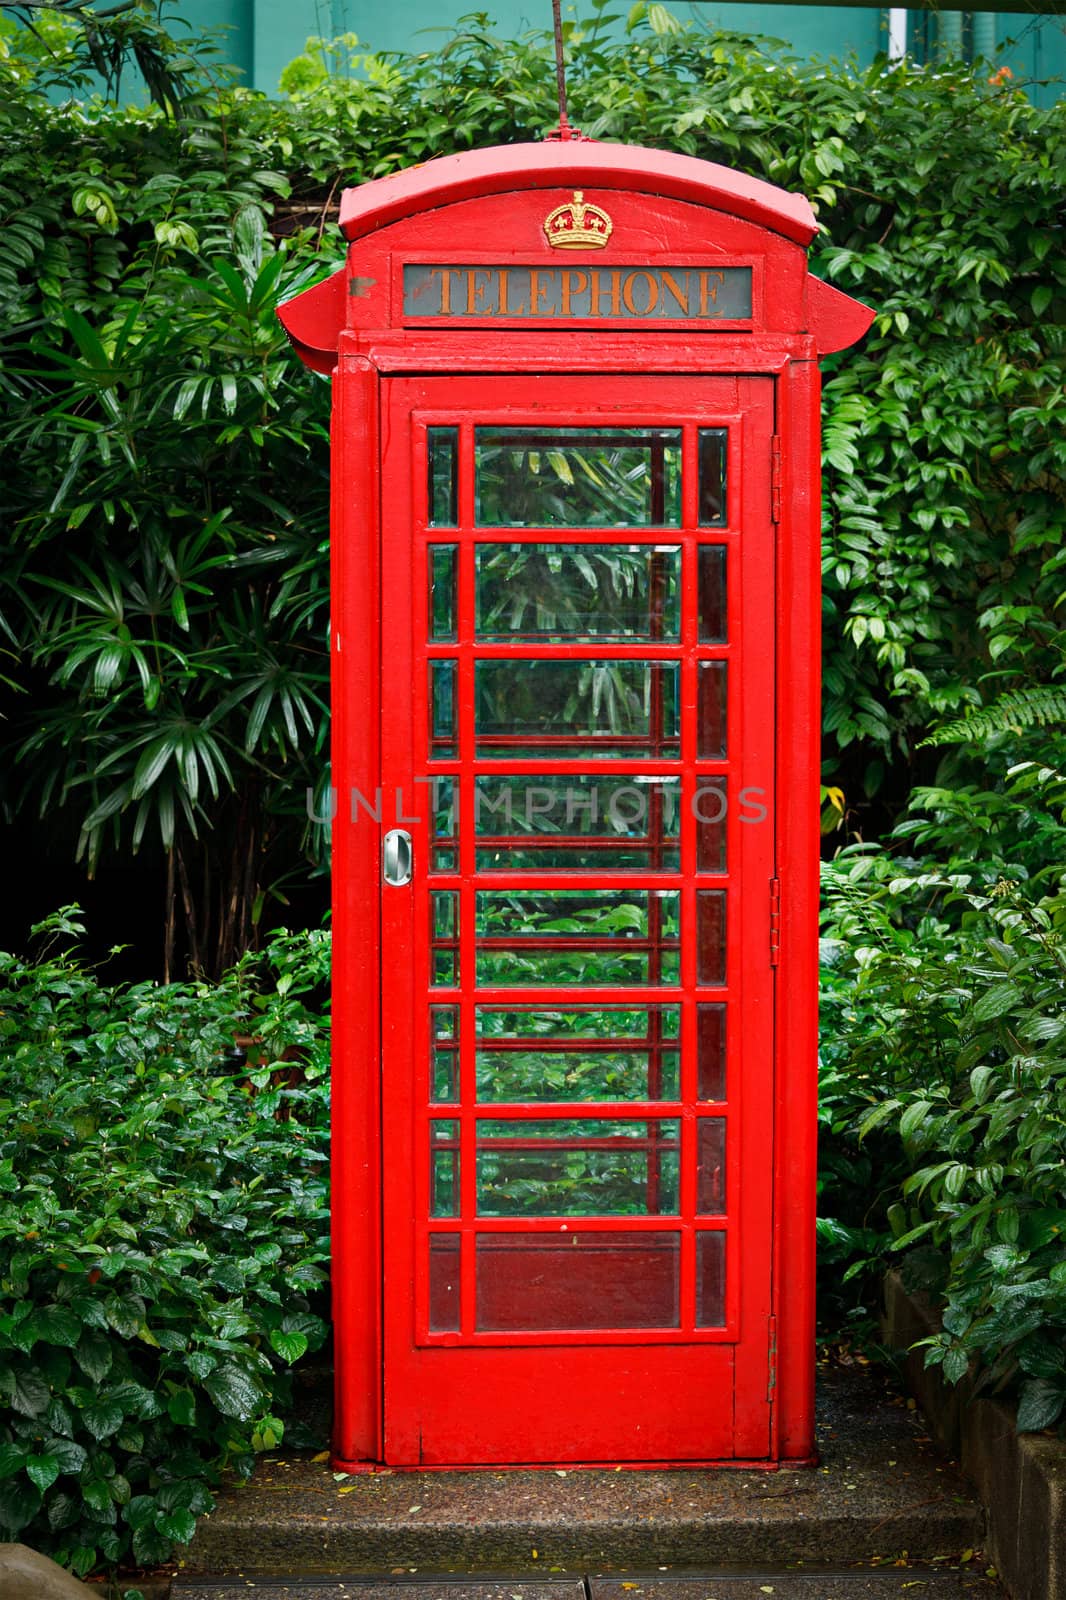 Red English telephone booth by dimol